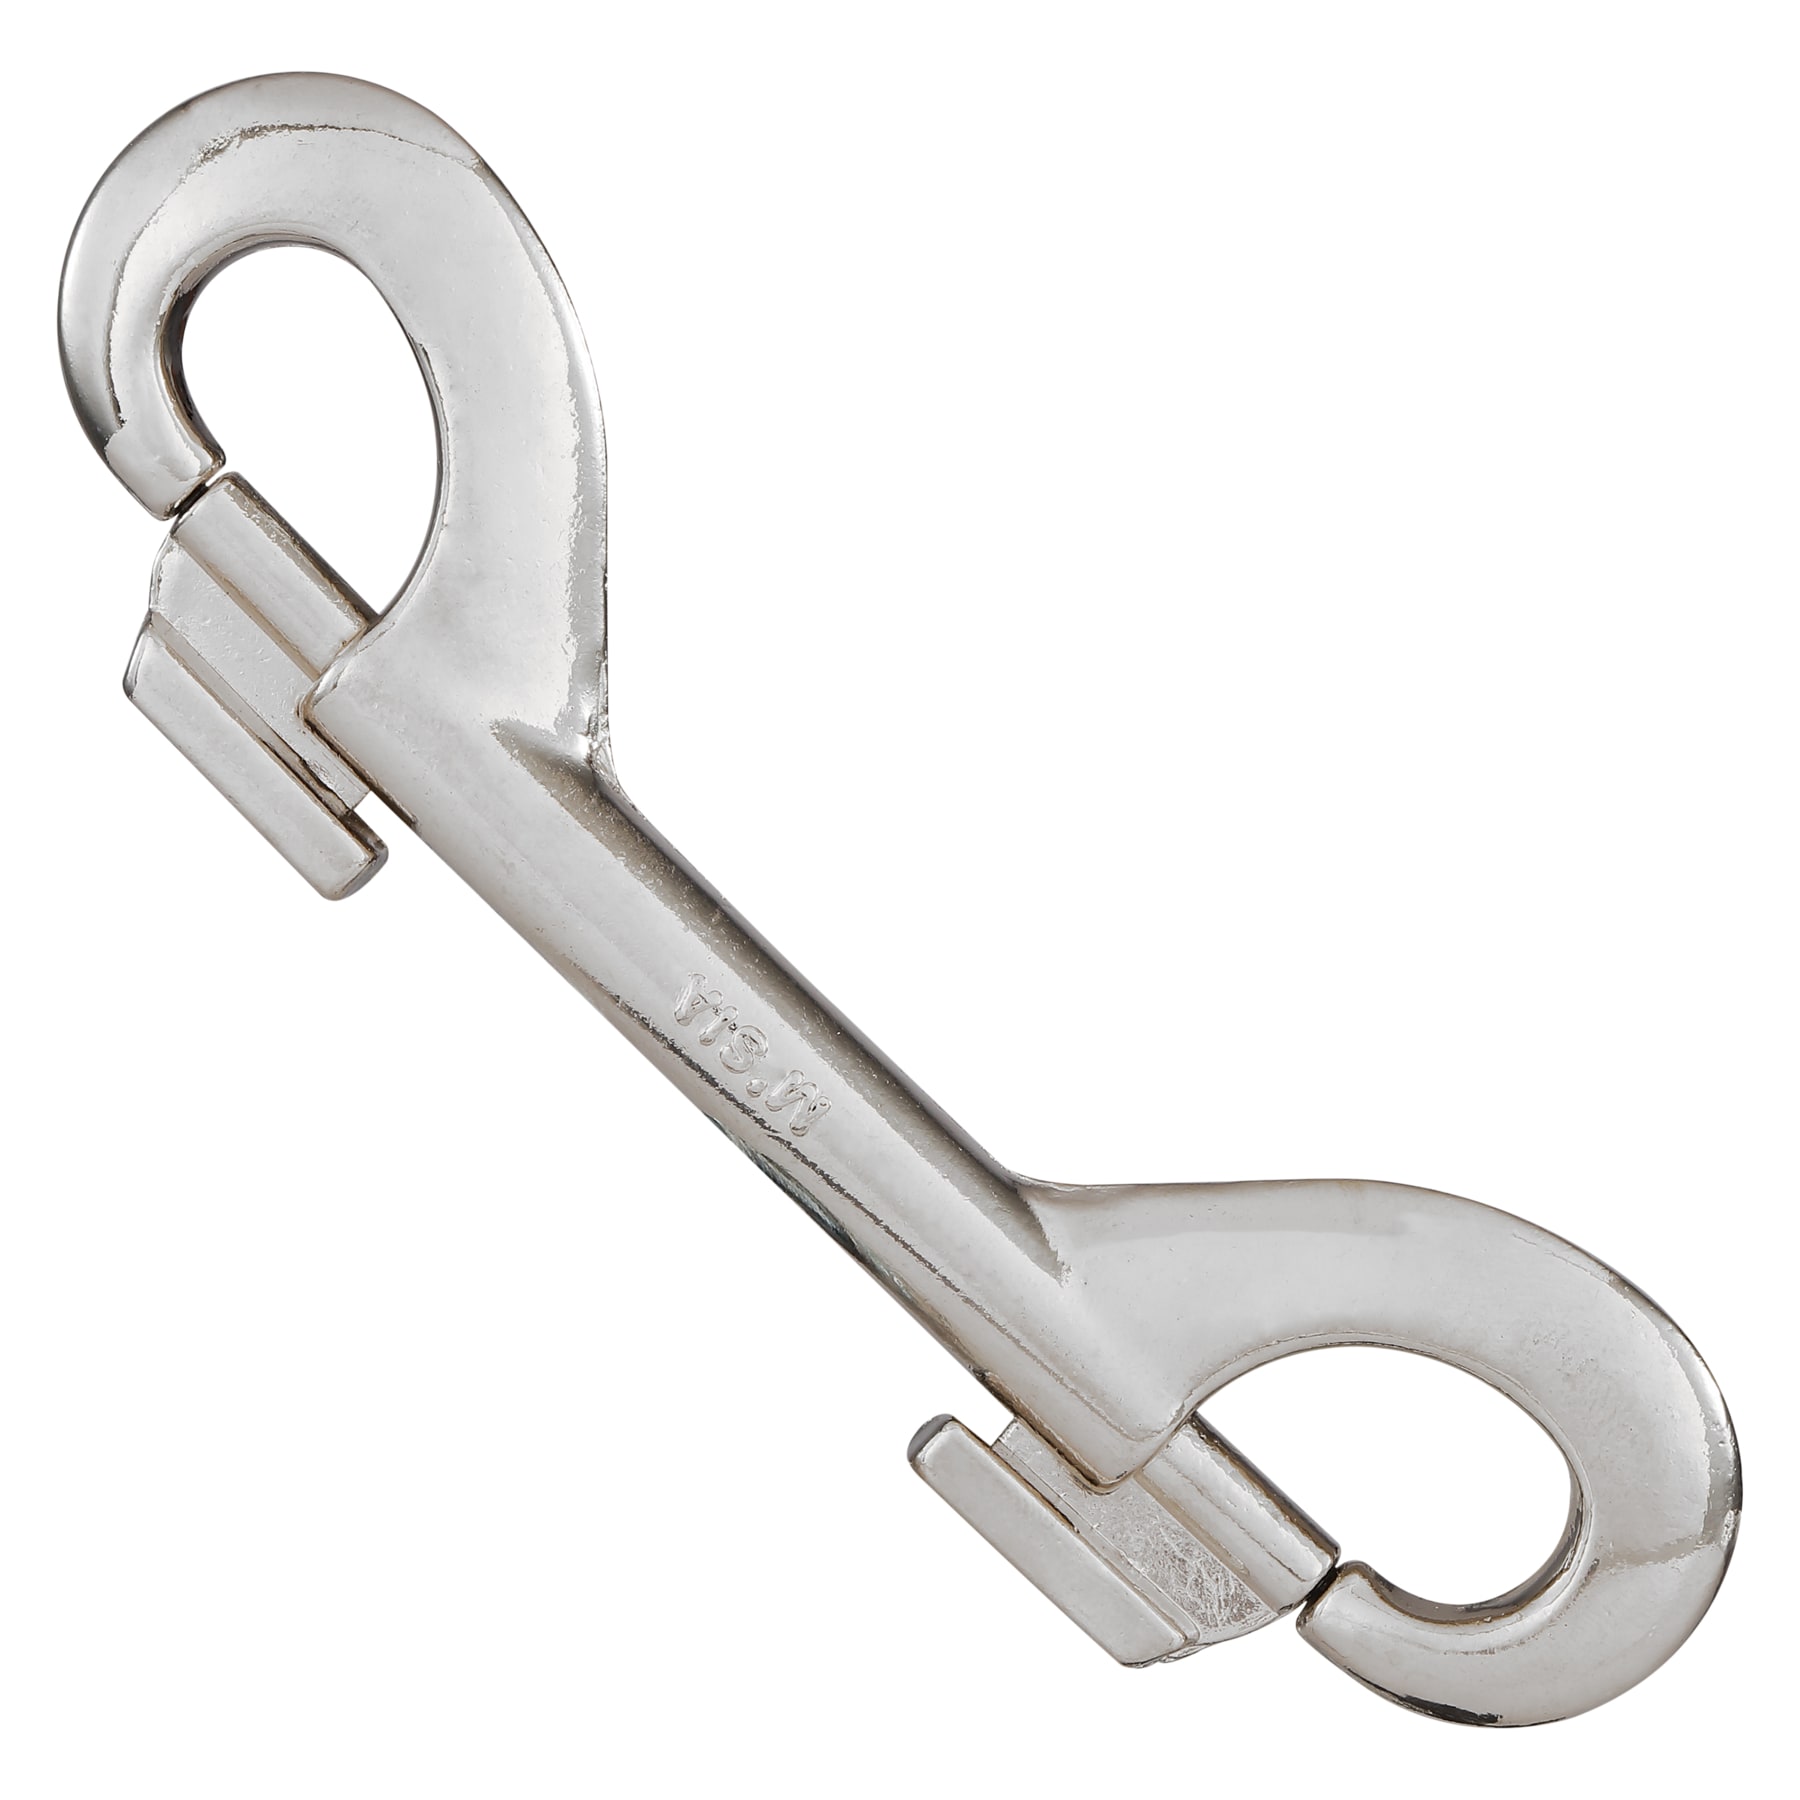 National Hardware N100-272- 4-9/16-in Double Bolt Snap in Nickel